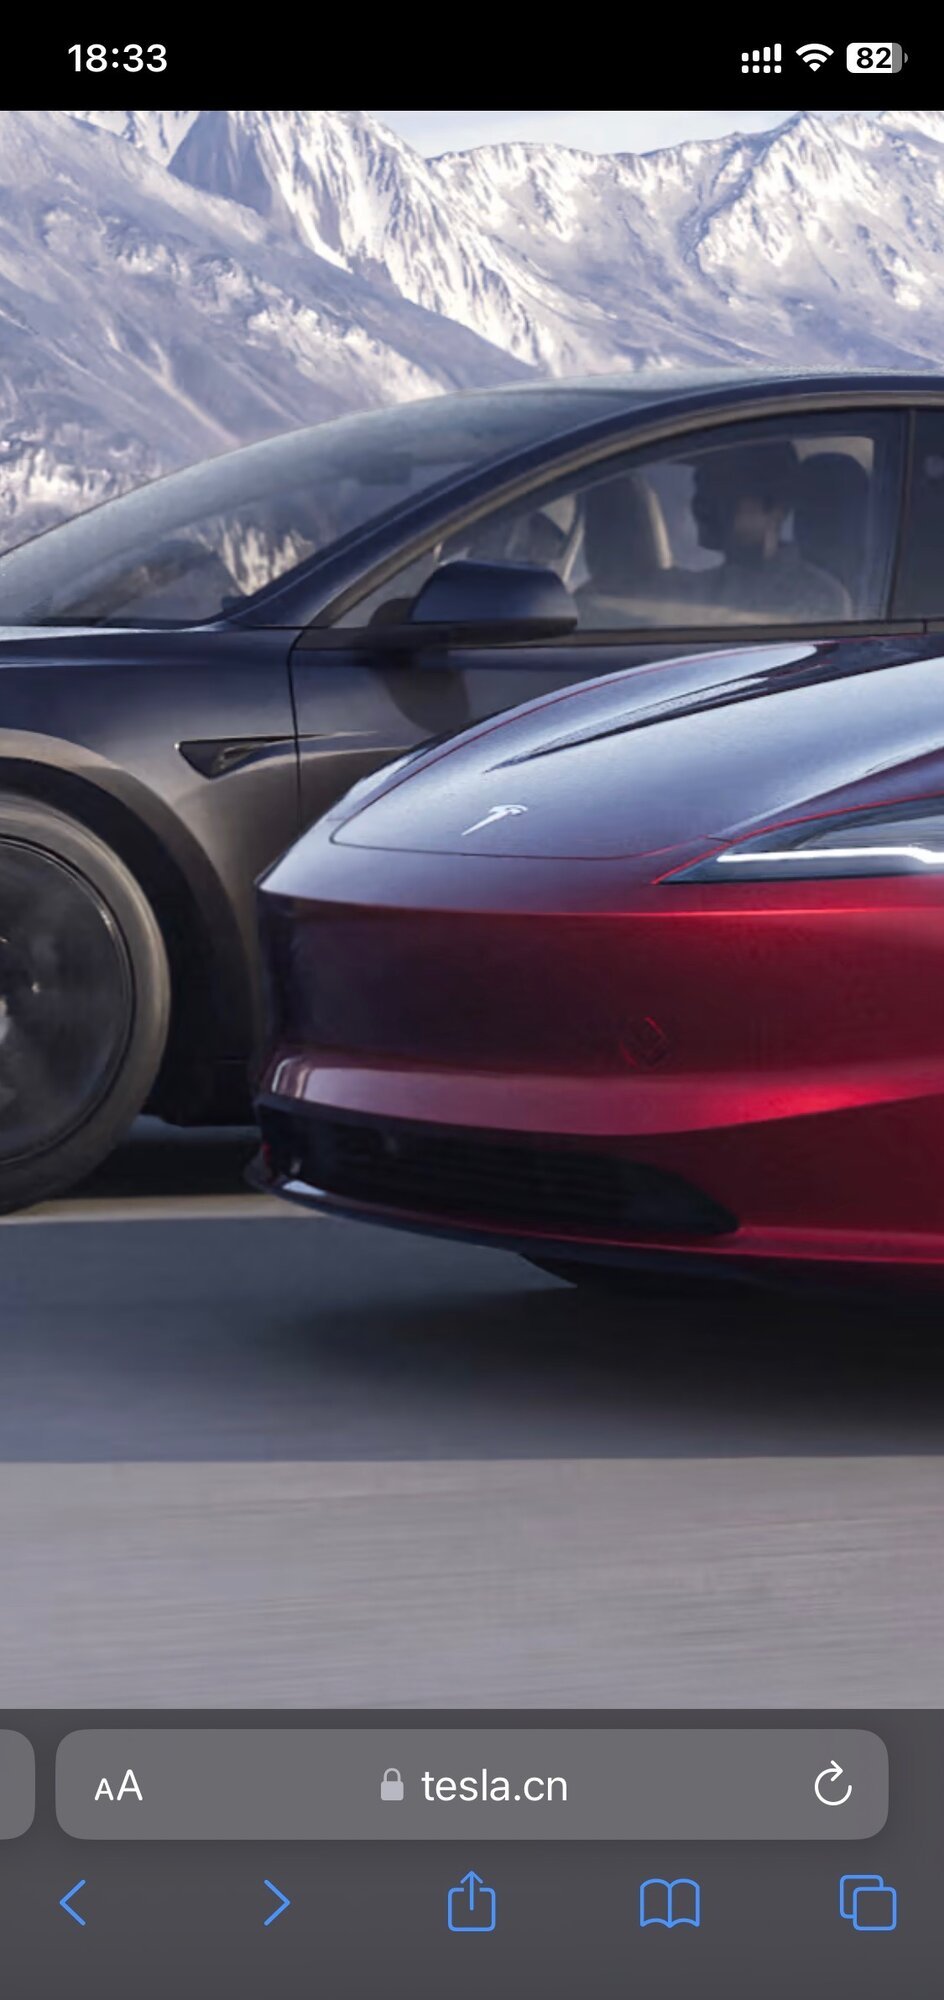 Reuters: Tesla readies revamped Model 3 with project 'Highland' -sources  [projected 3rd quarter 2023], Page 62